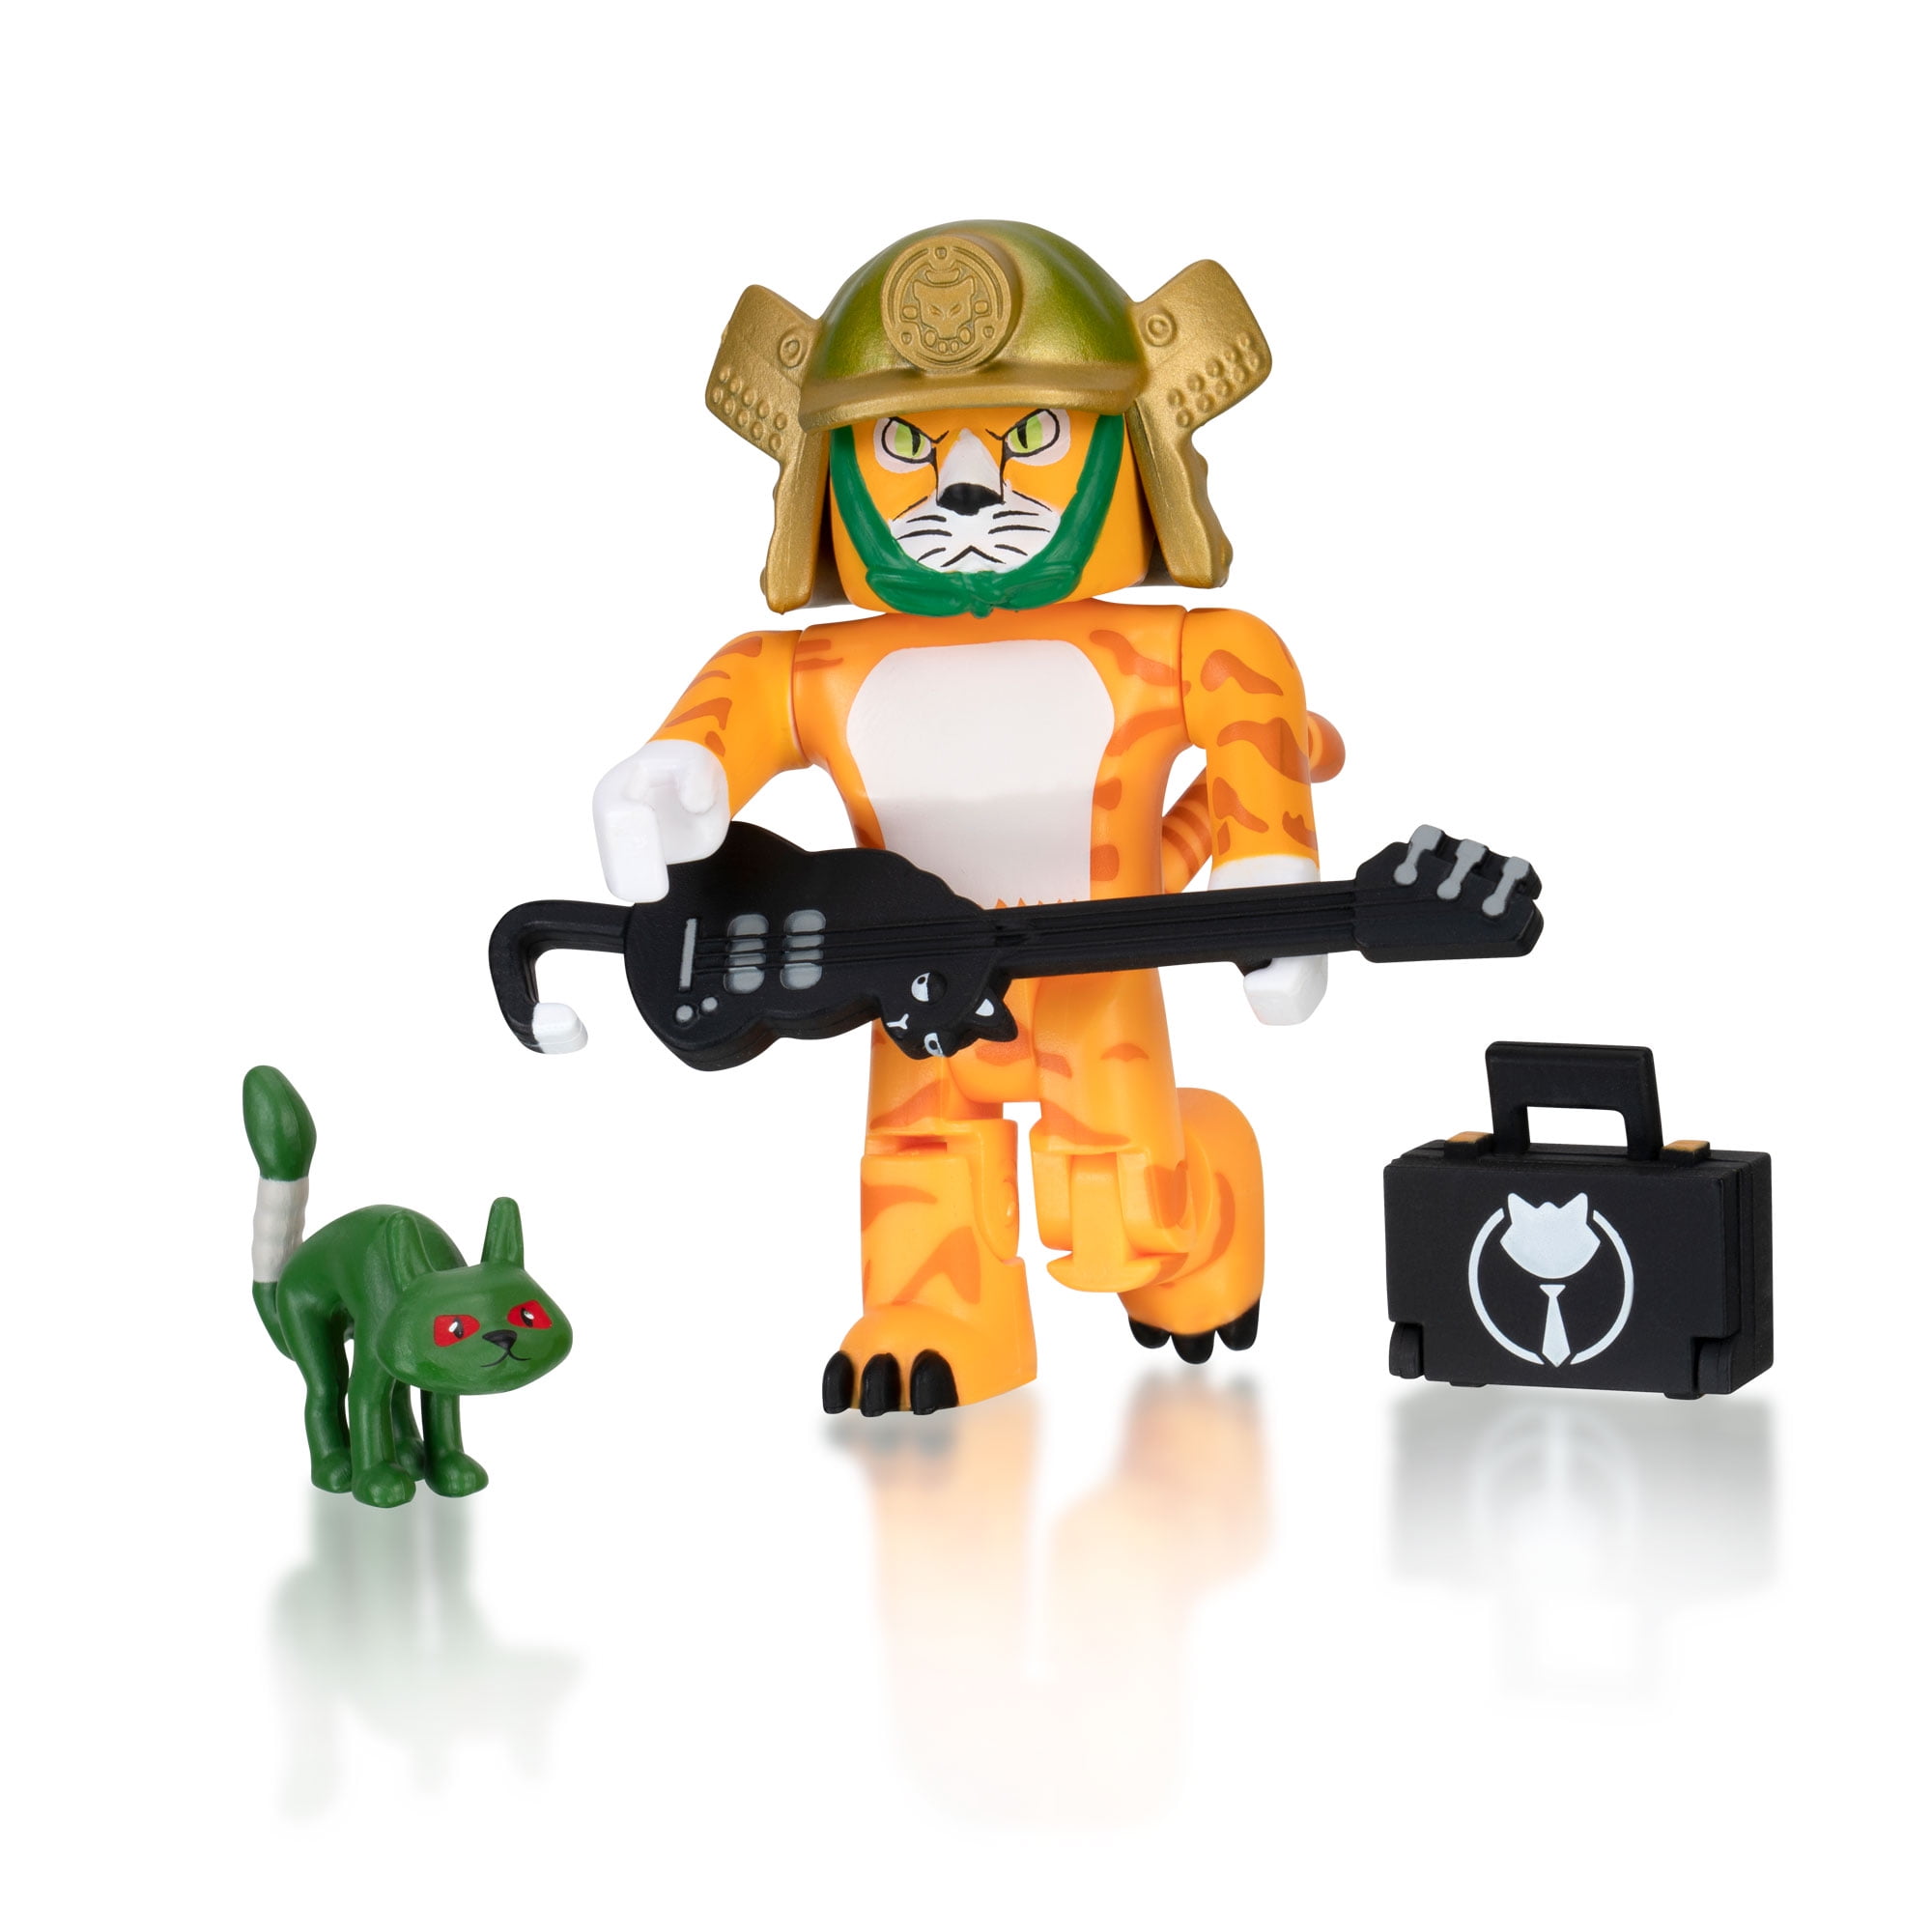  Roblox Avatar Shop Series Collection - Spark Beast Figure Pack  [Includes Exclusive Virtual Item] : Toys & Games